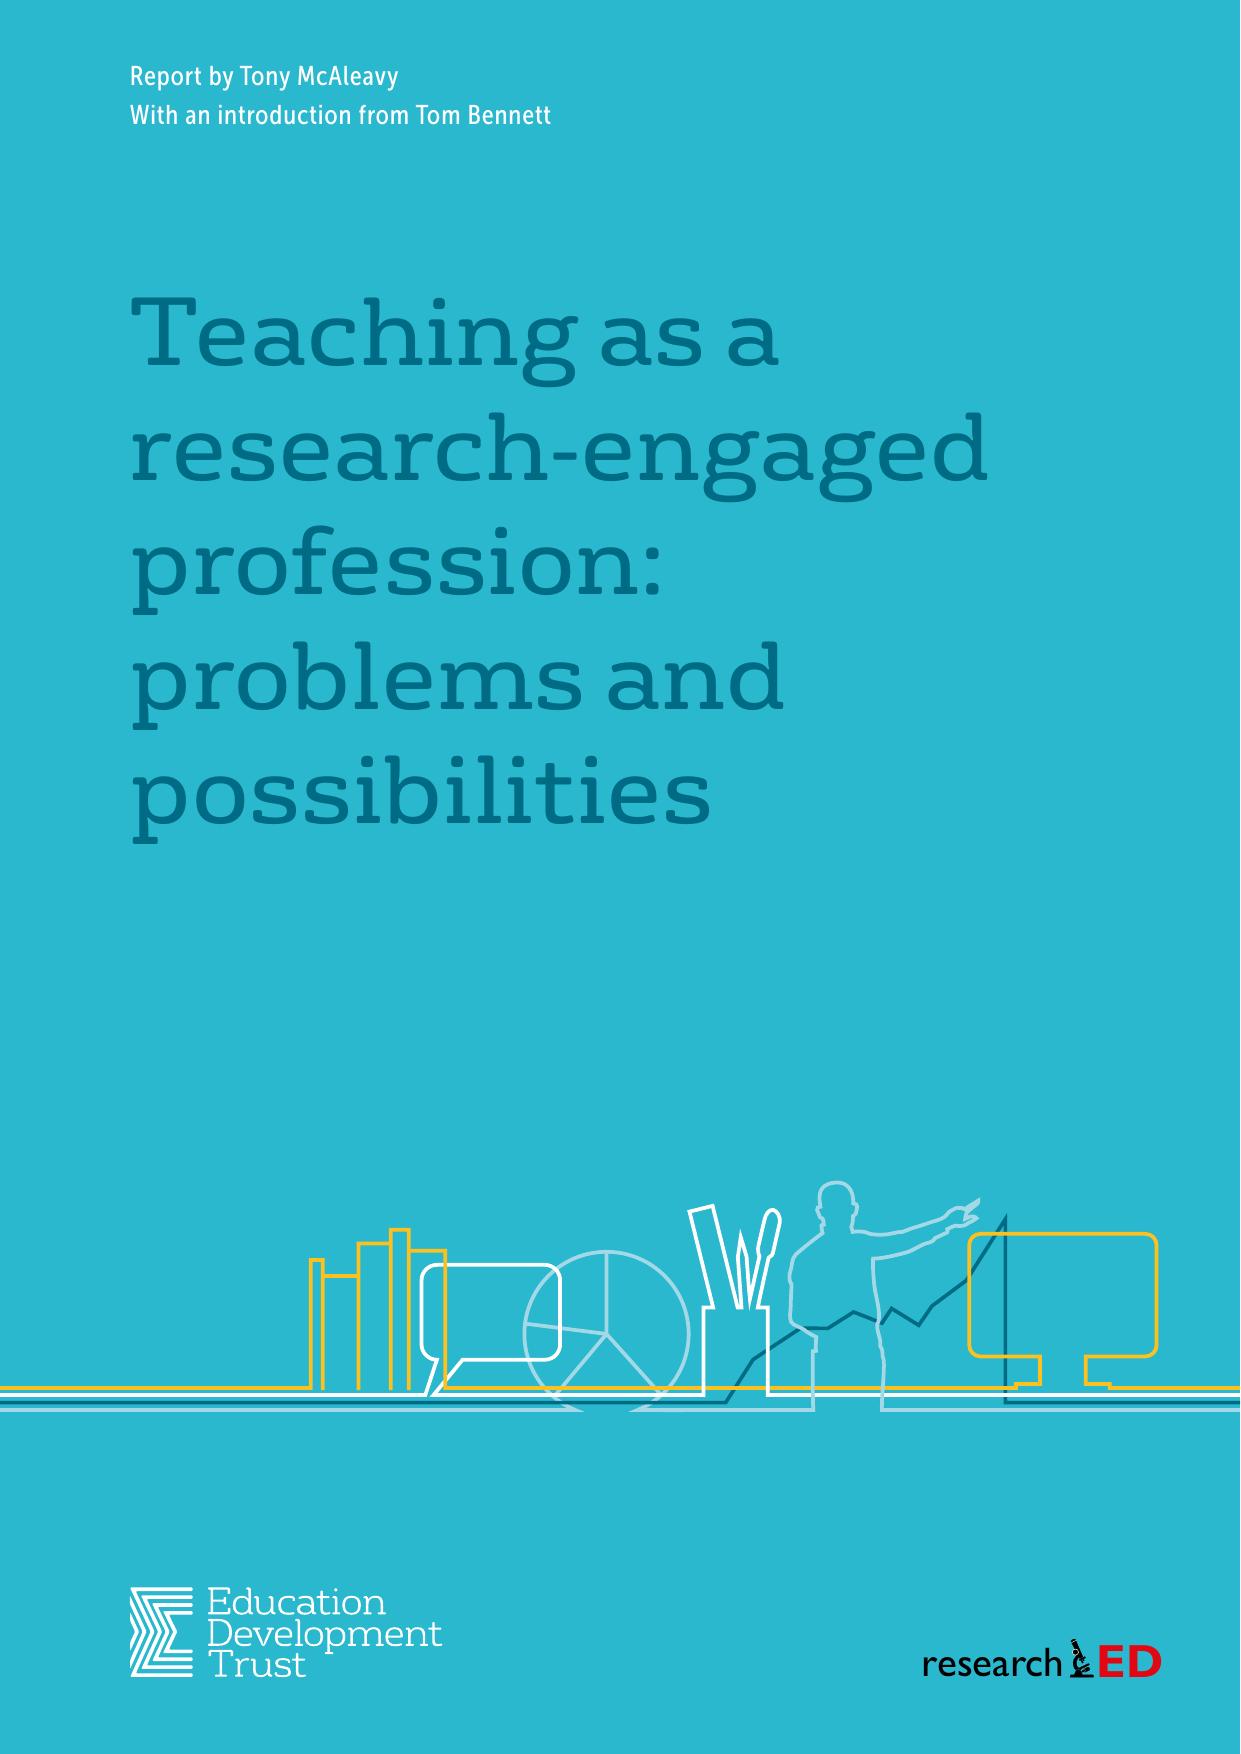 Teaching as a research-engaged profession 2016